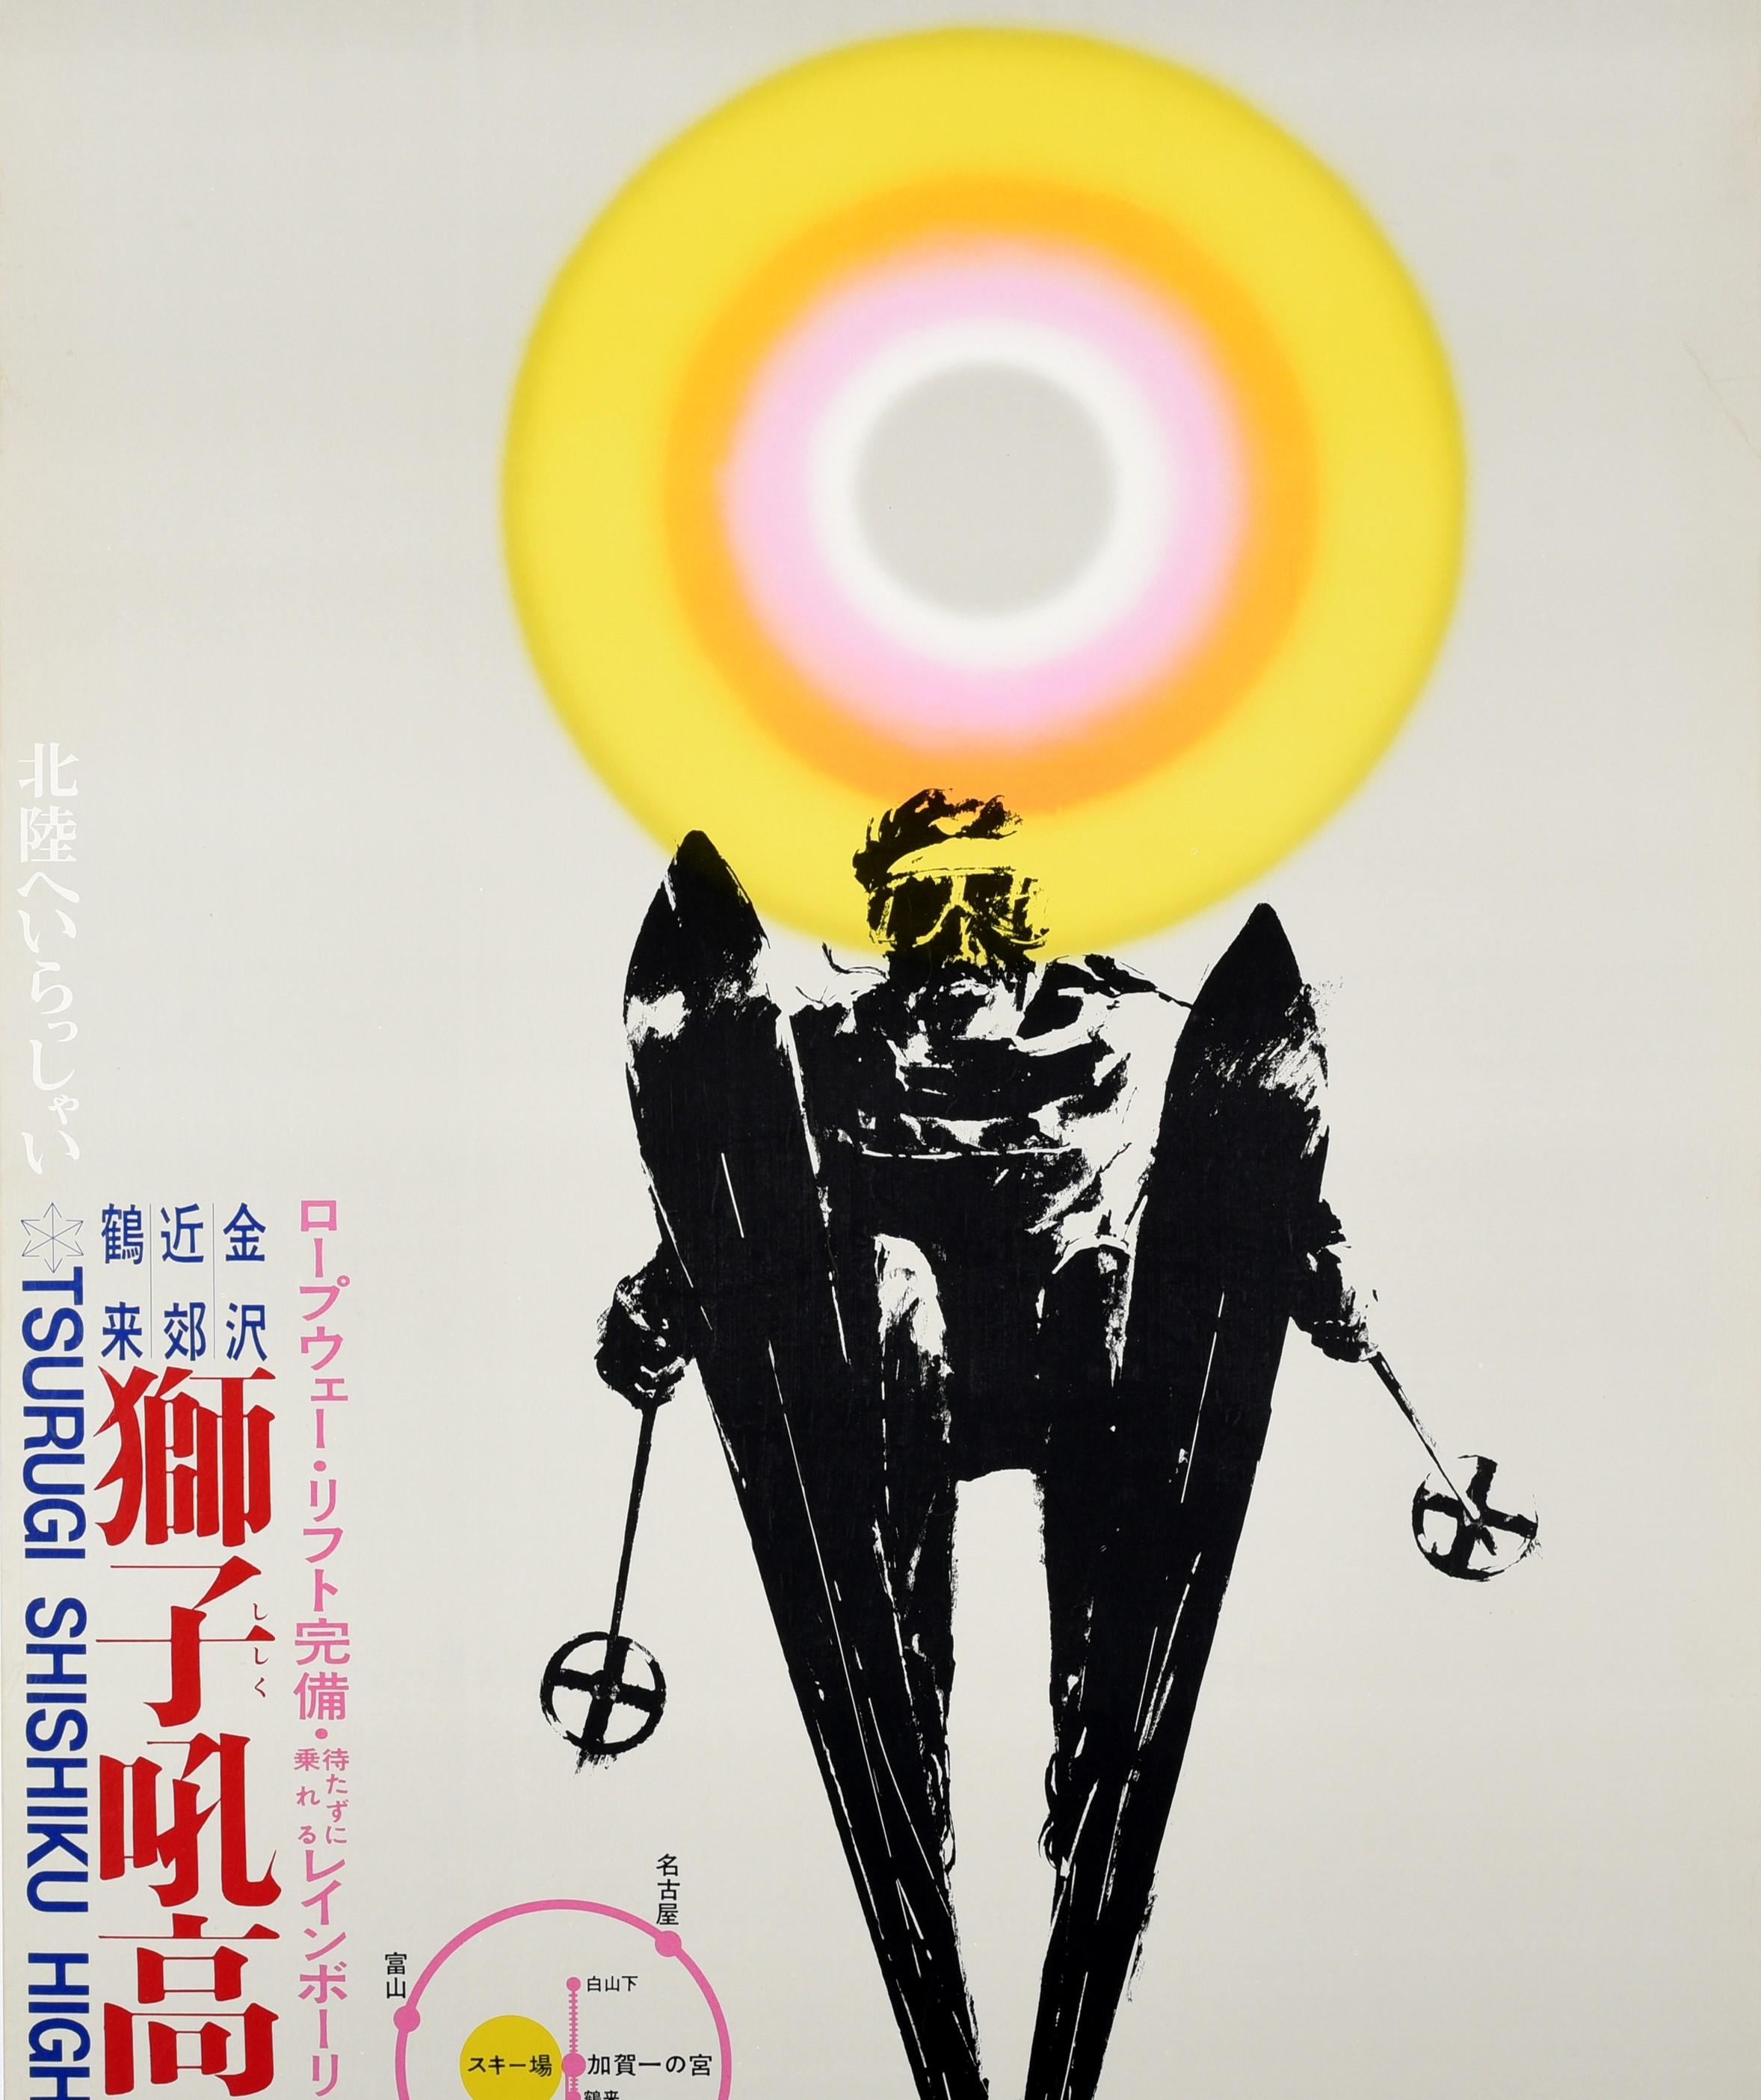 Original vintage ski travel poster for the Tsurugi Shishiku Highland featuring a dynamic image of a skier in black in front of a colourful grey, white, pink, orange and yellow sun in the background, the bold title text on the side with details of